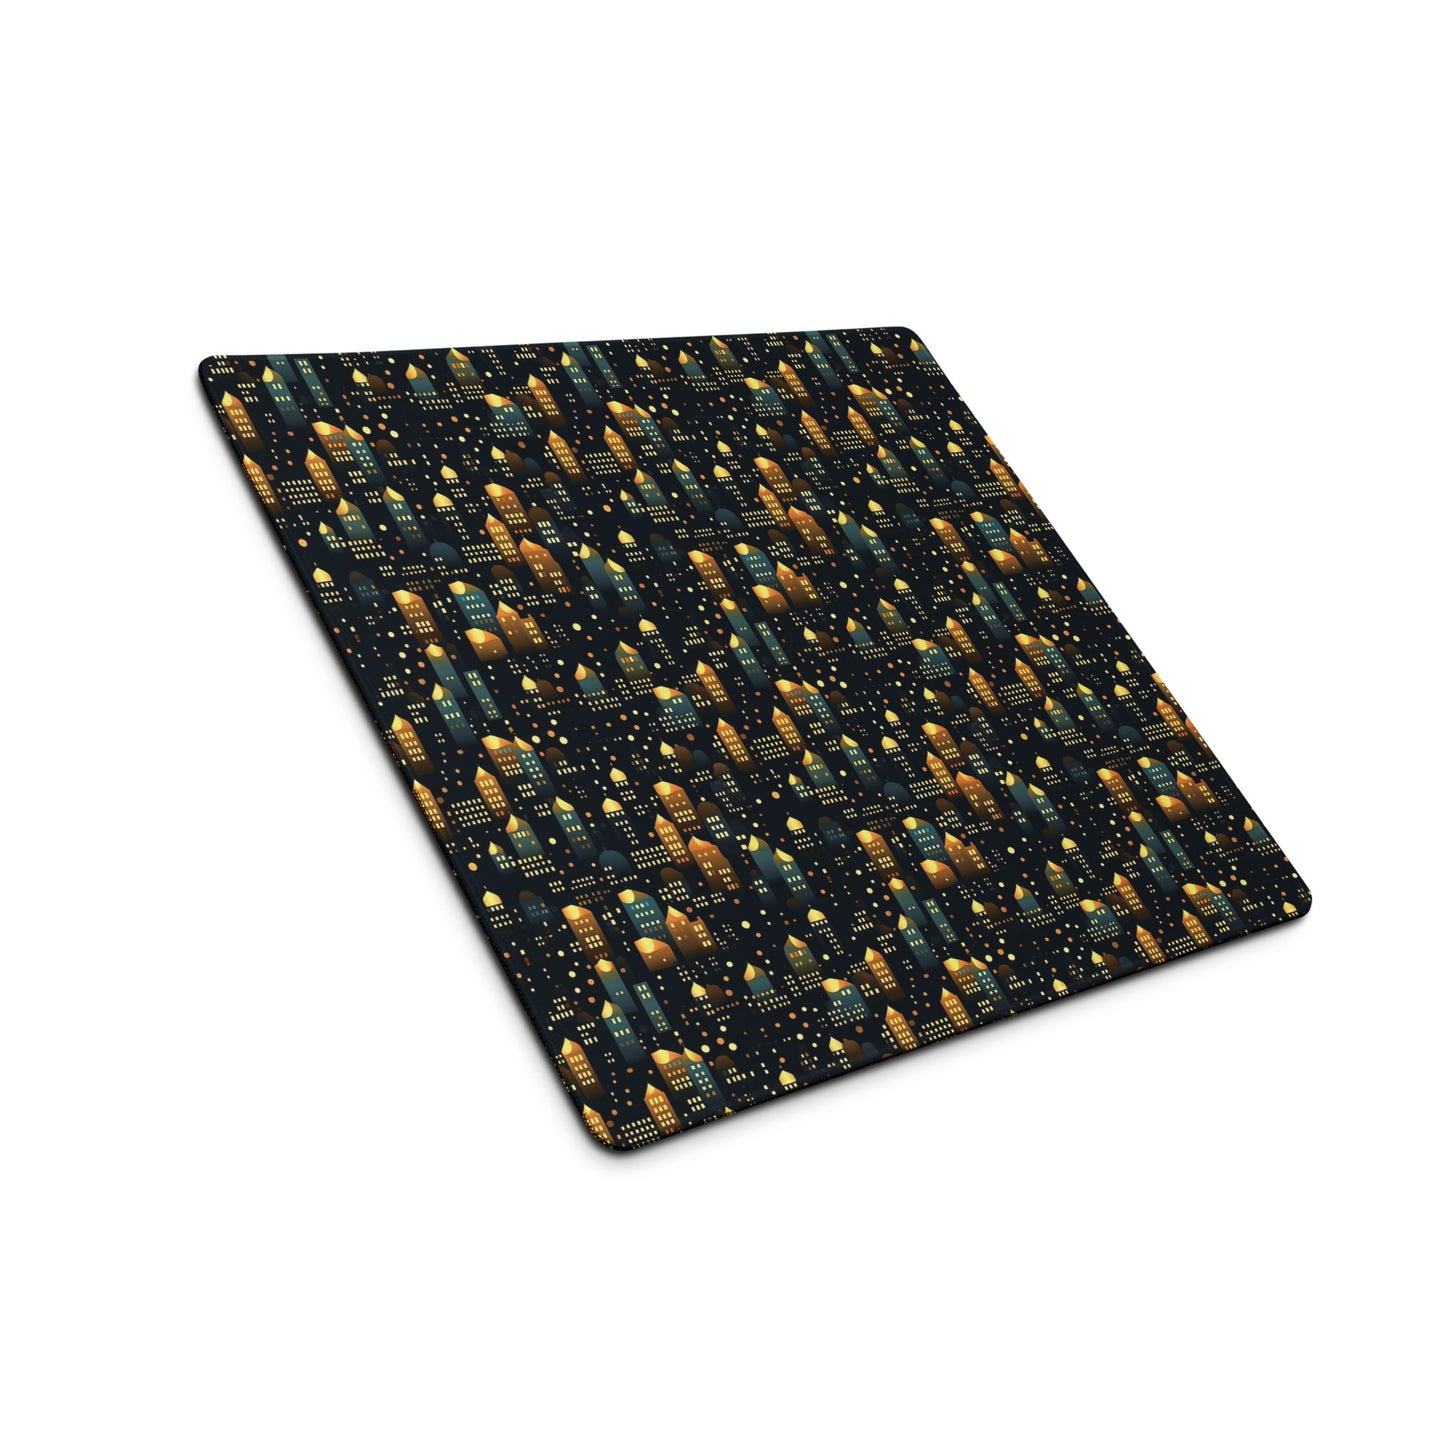 A 18" x 16" desk pad with a stary city pattern sitting at an angle.